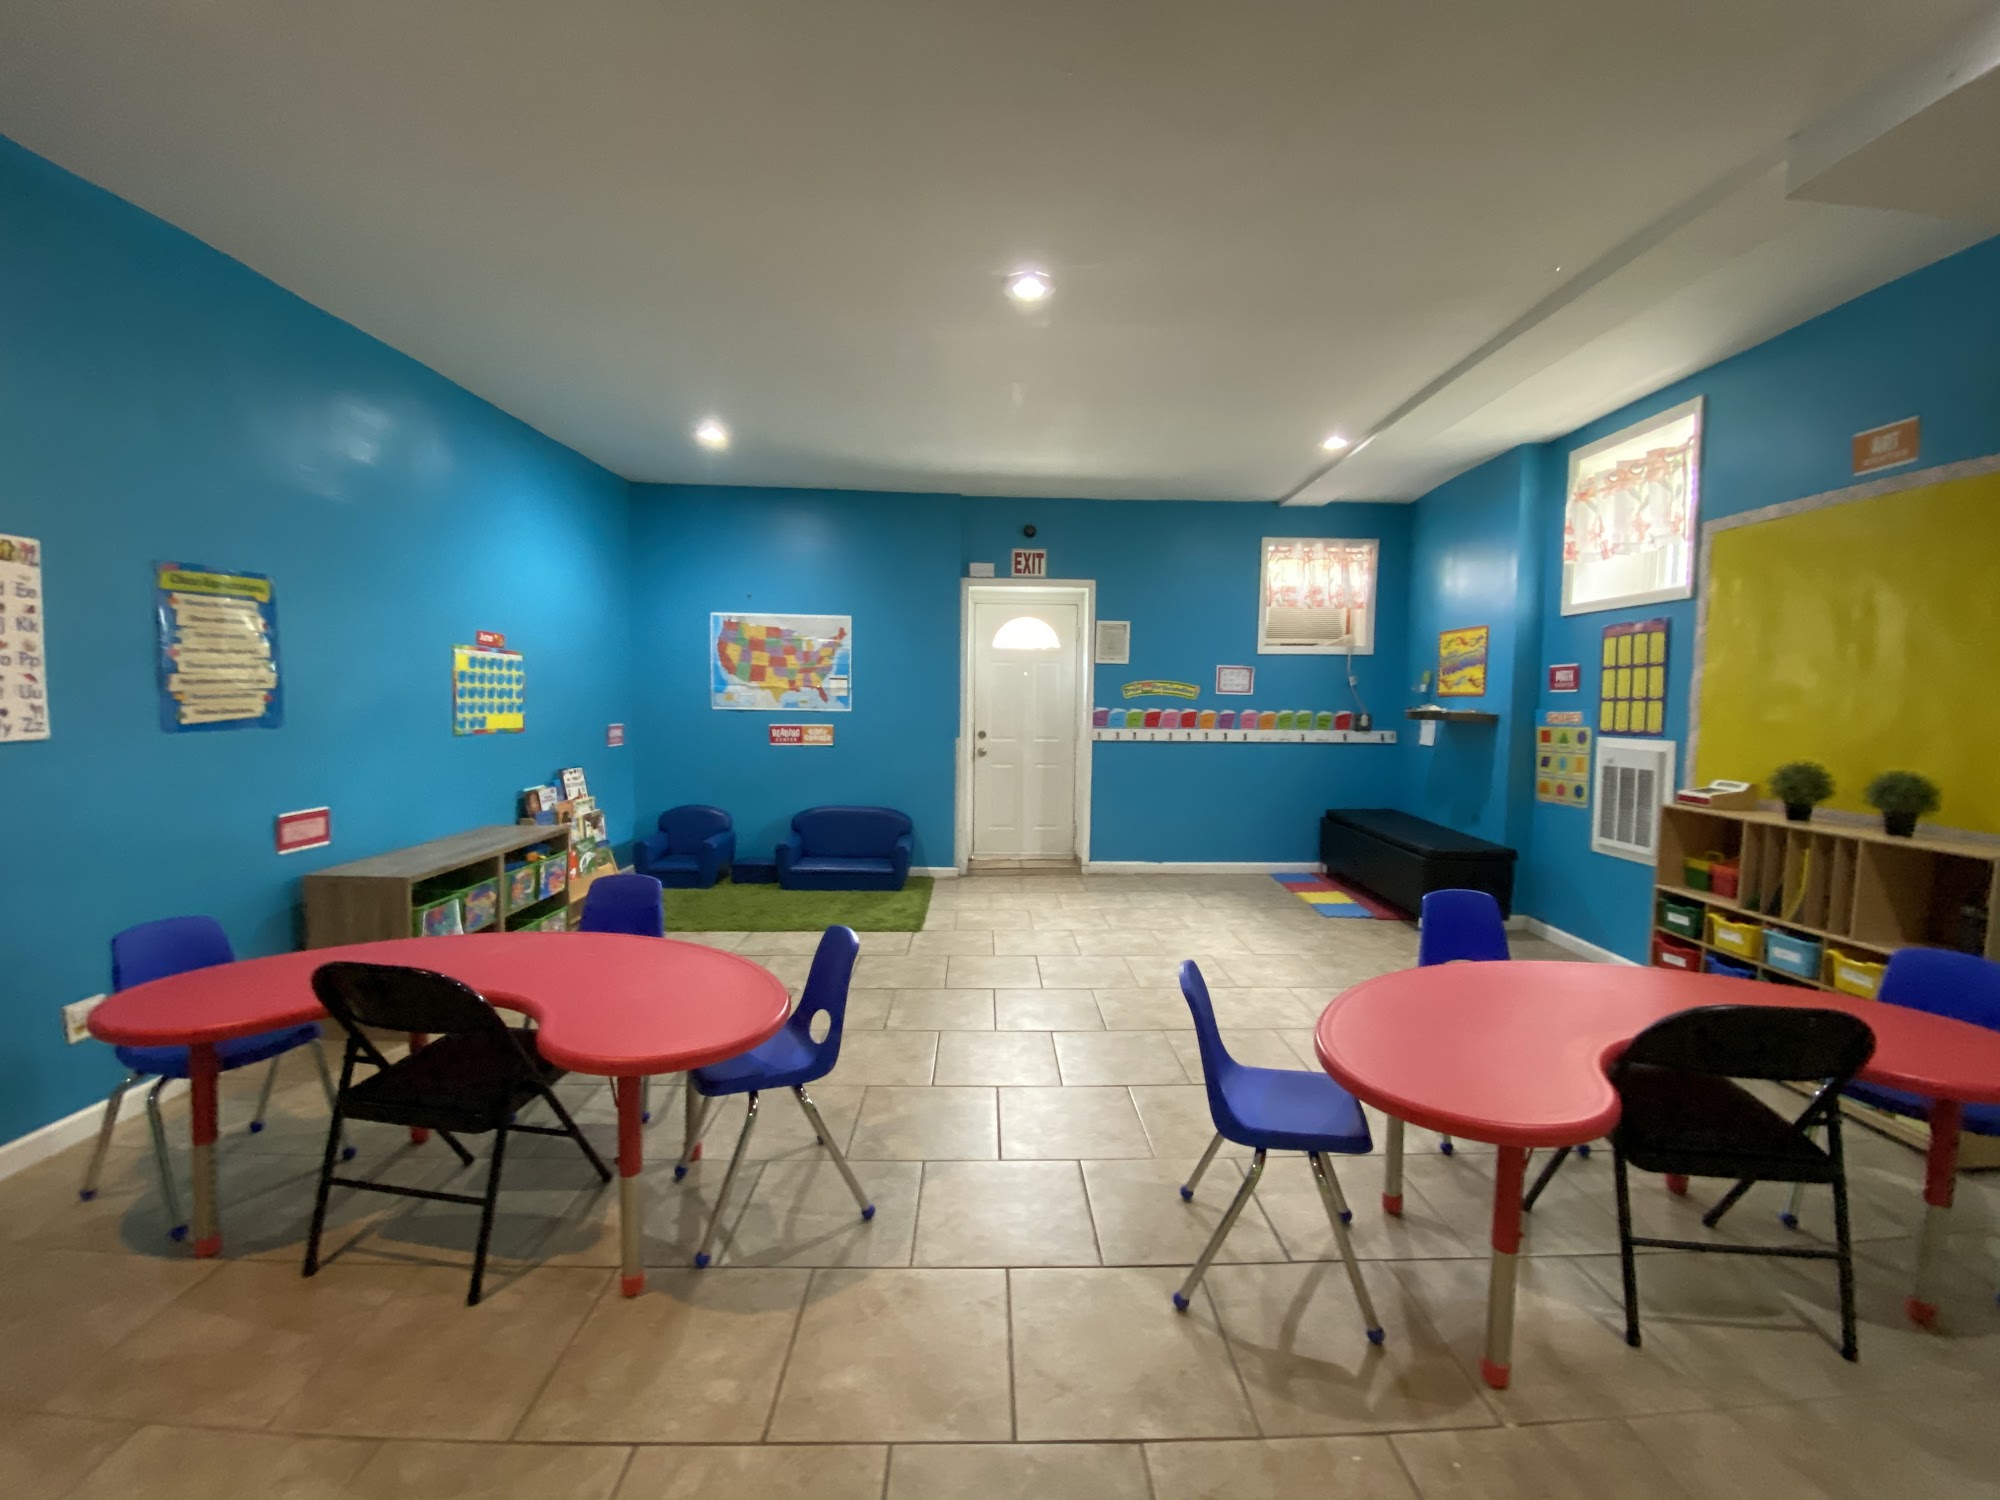 Our kid’s rainbow daycare 2